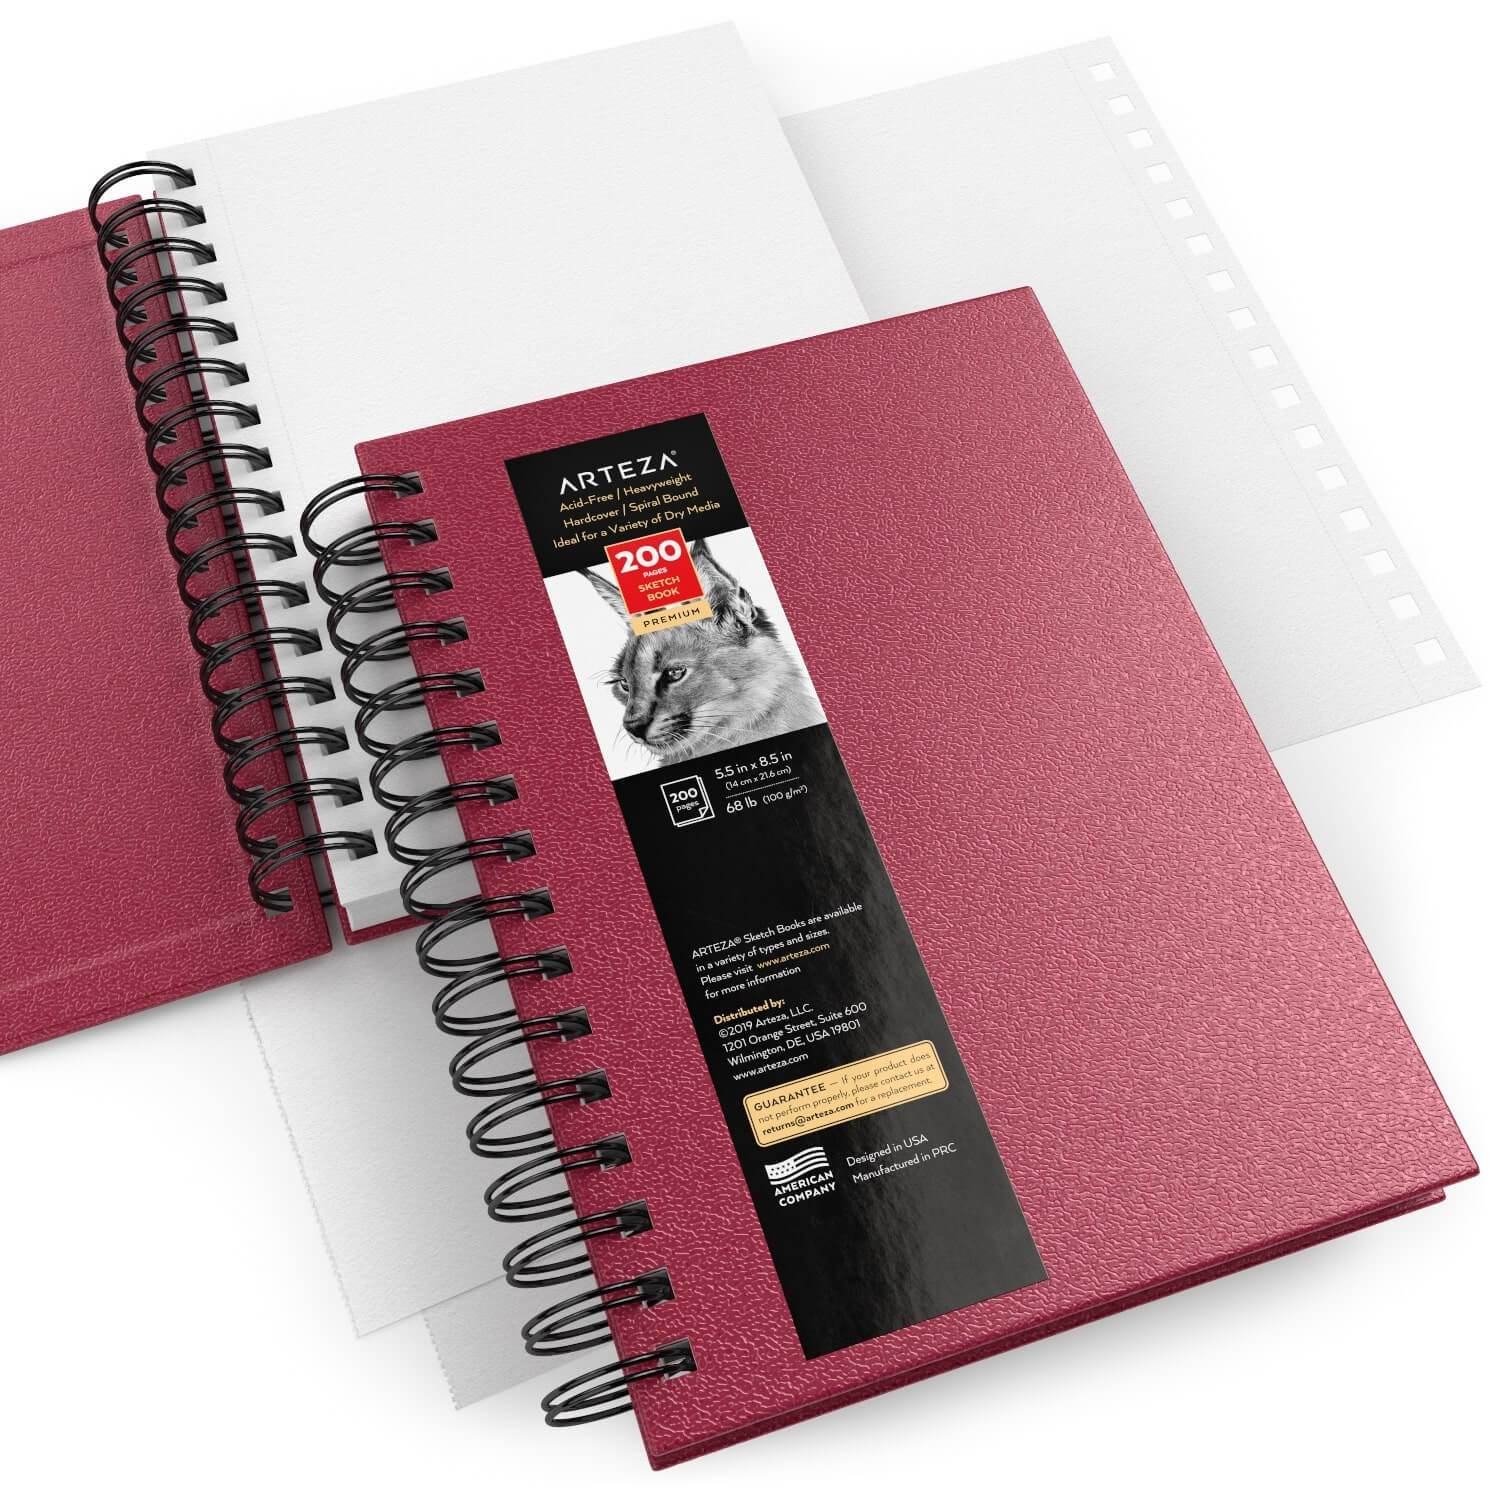 A5 Sketchbook Scrapbook - GDAM004 - IdeaStage Promotional Products